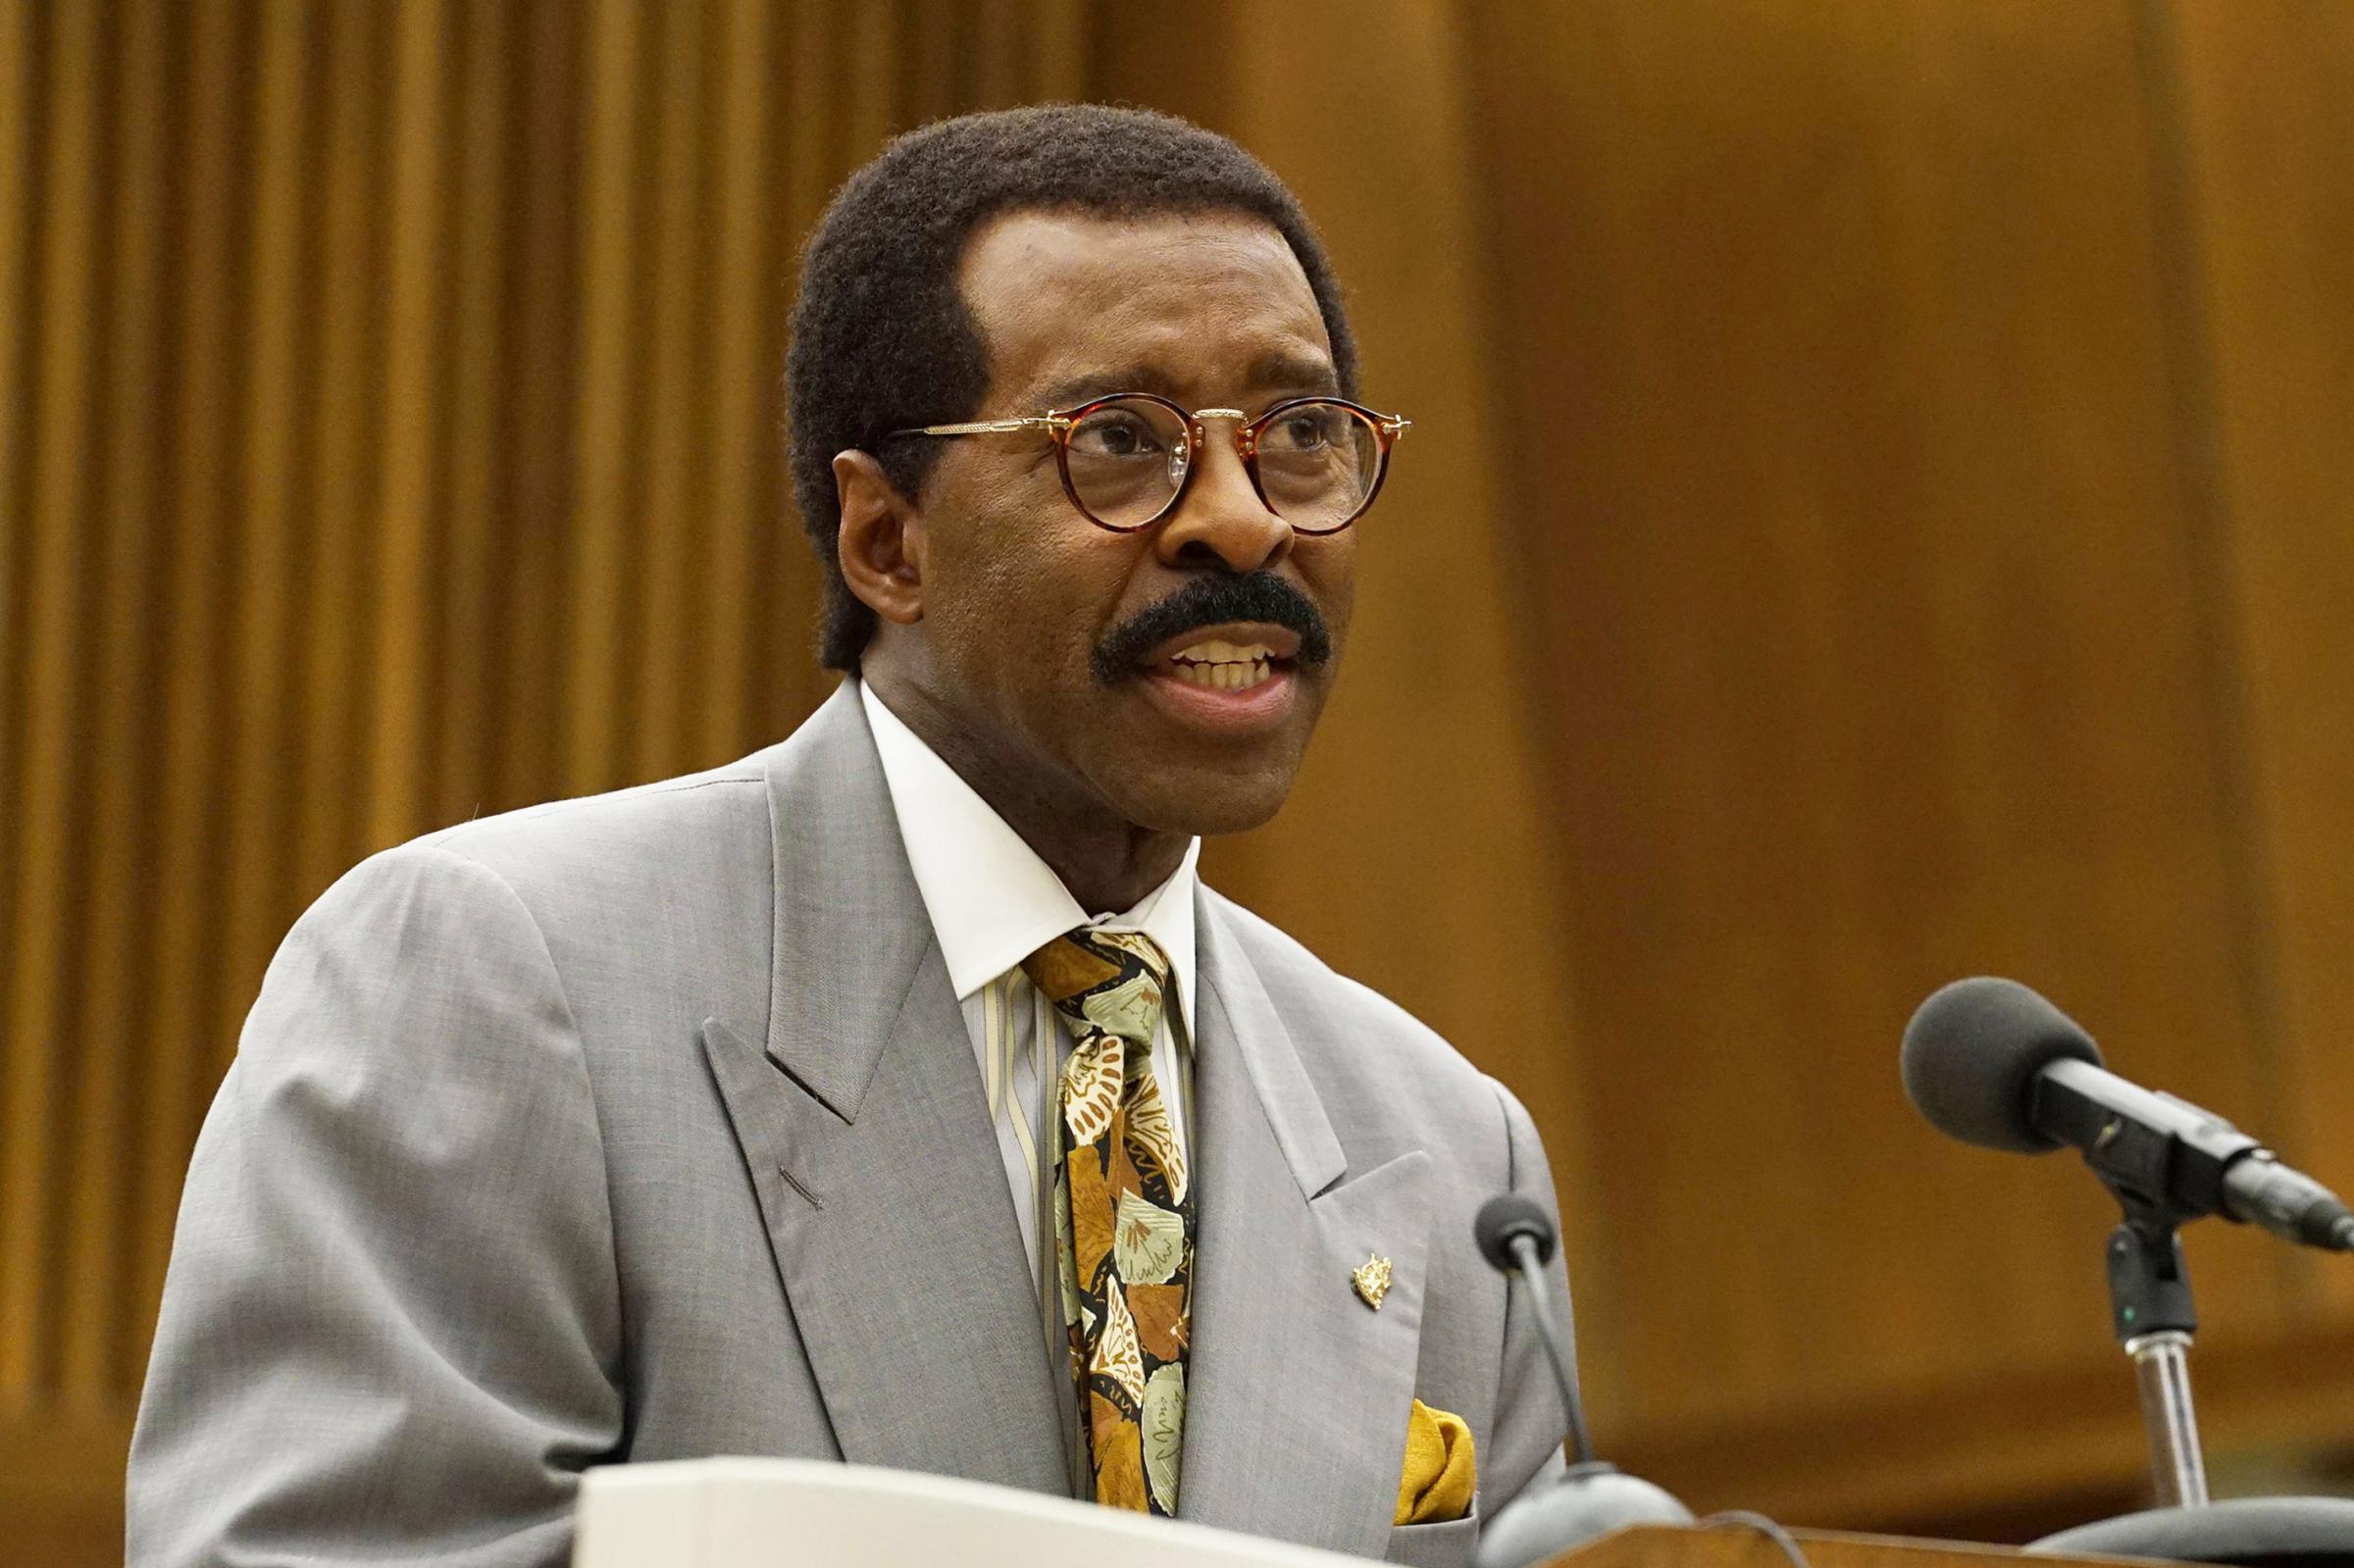 THE PEOPLE v. O.J. SIMPSON: AMERICAN CRIME STORY "Manna From Heaven" Episode 109 (Airs Tuesday, March 29, 10:00 pm/ep) -- Pictured: Courtney B. Vance as Johnnie Cochran. CR: Byron Cohen /FX